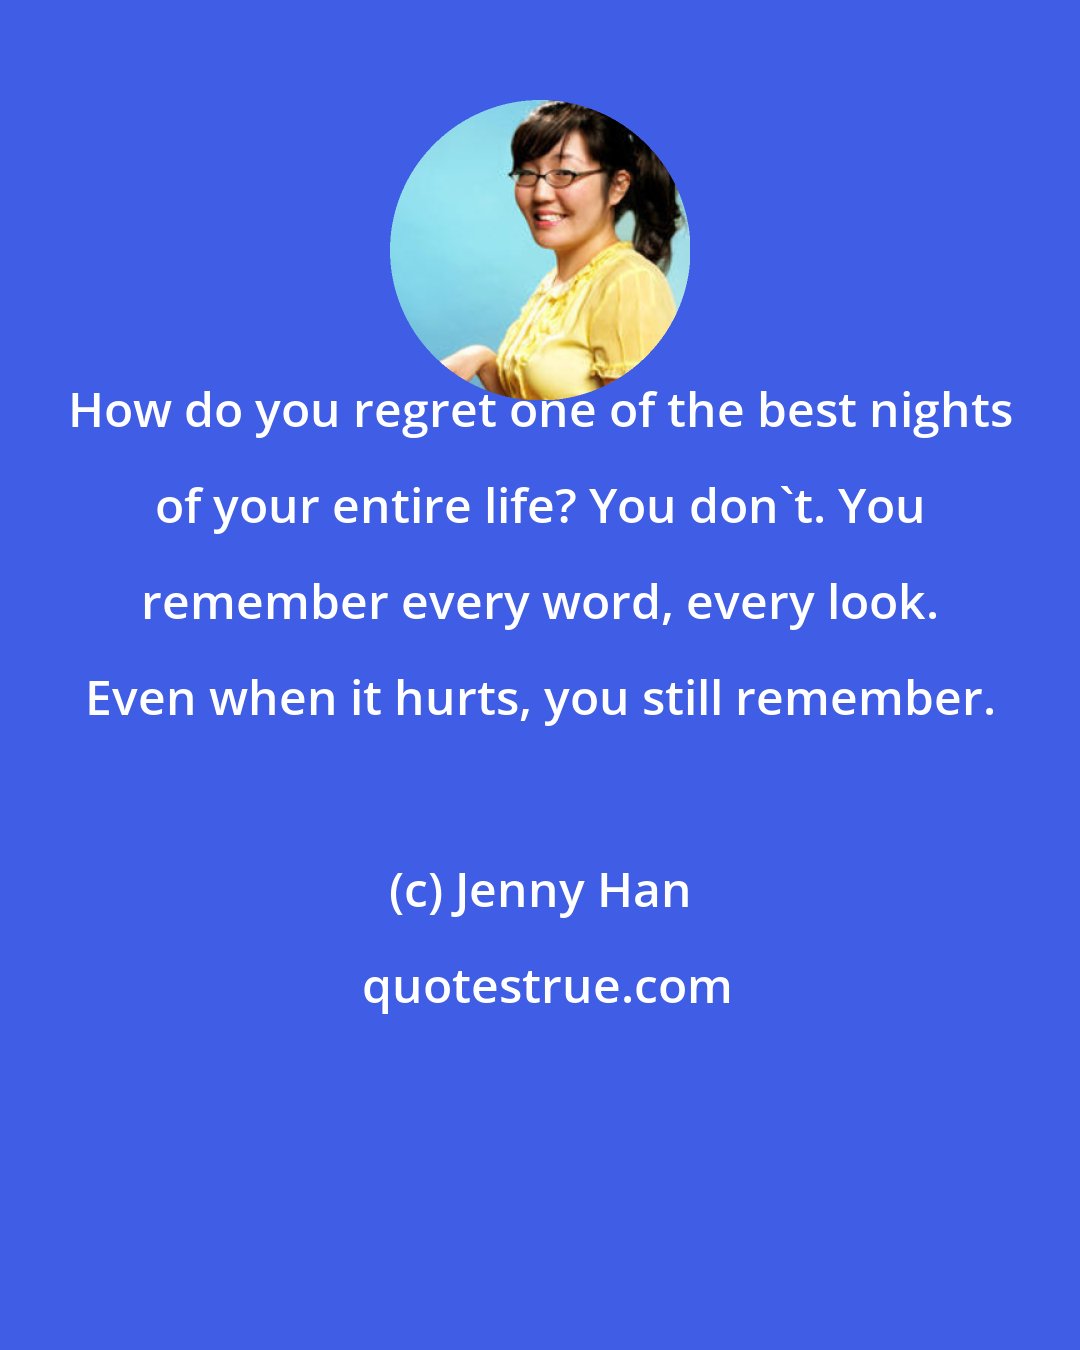 Jenny Han: How do you regret one of the best nights of your entire life? You don't. You remember every word, every look. Even when it hurts, you still remember.